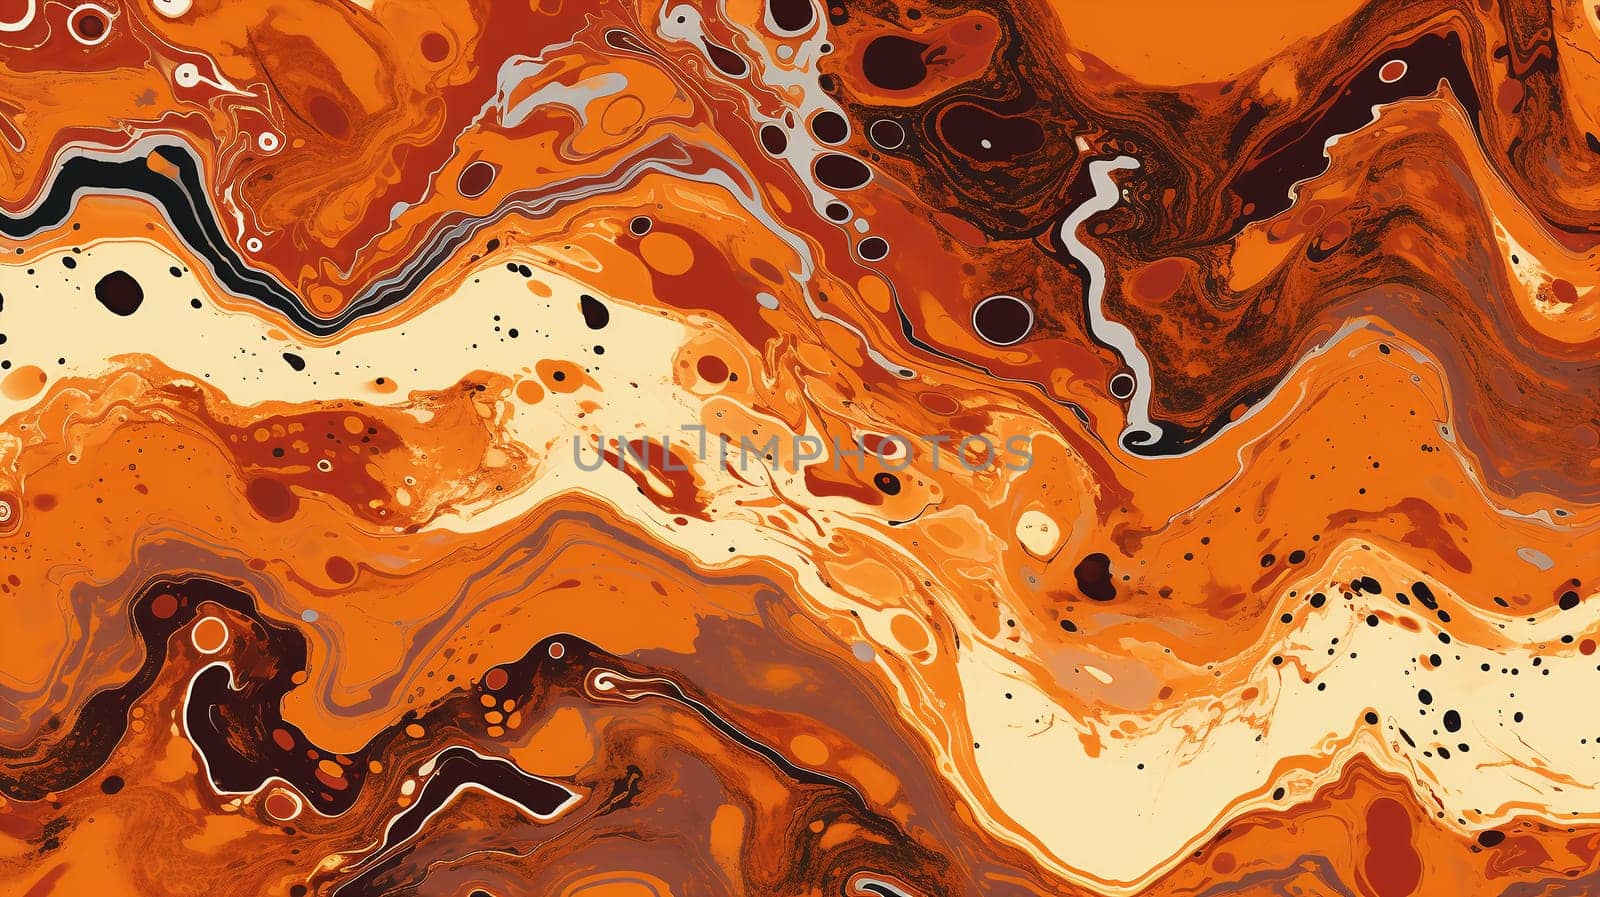 Vivid abstract marbling pattern with orange and black fluid shapes